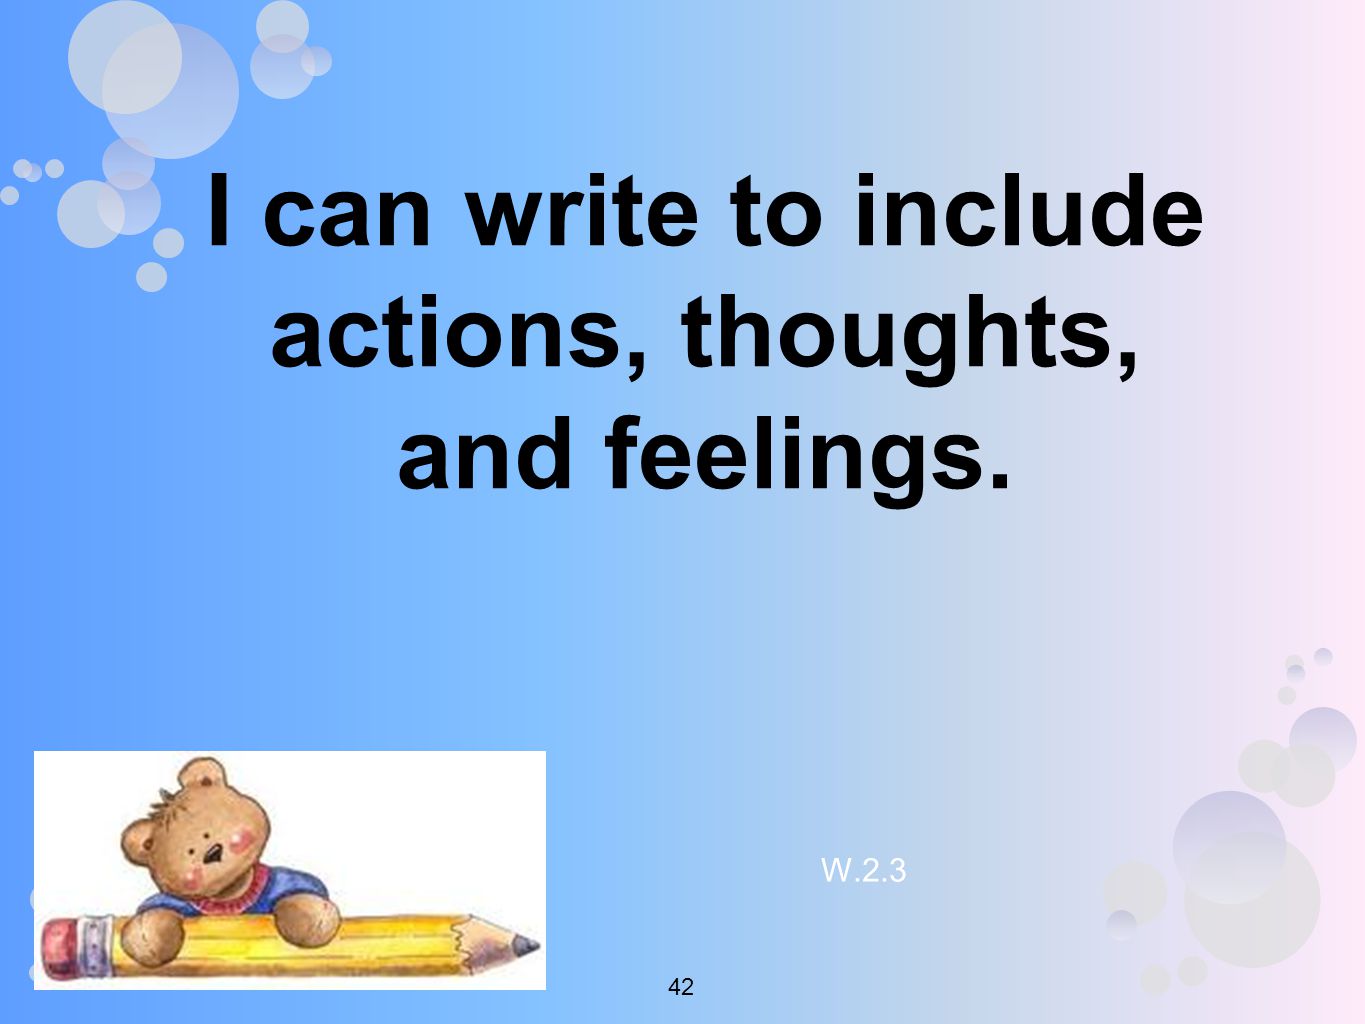 I can write to include actions, thoughts, and feelings. W